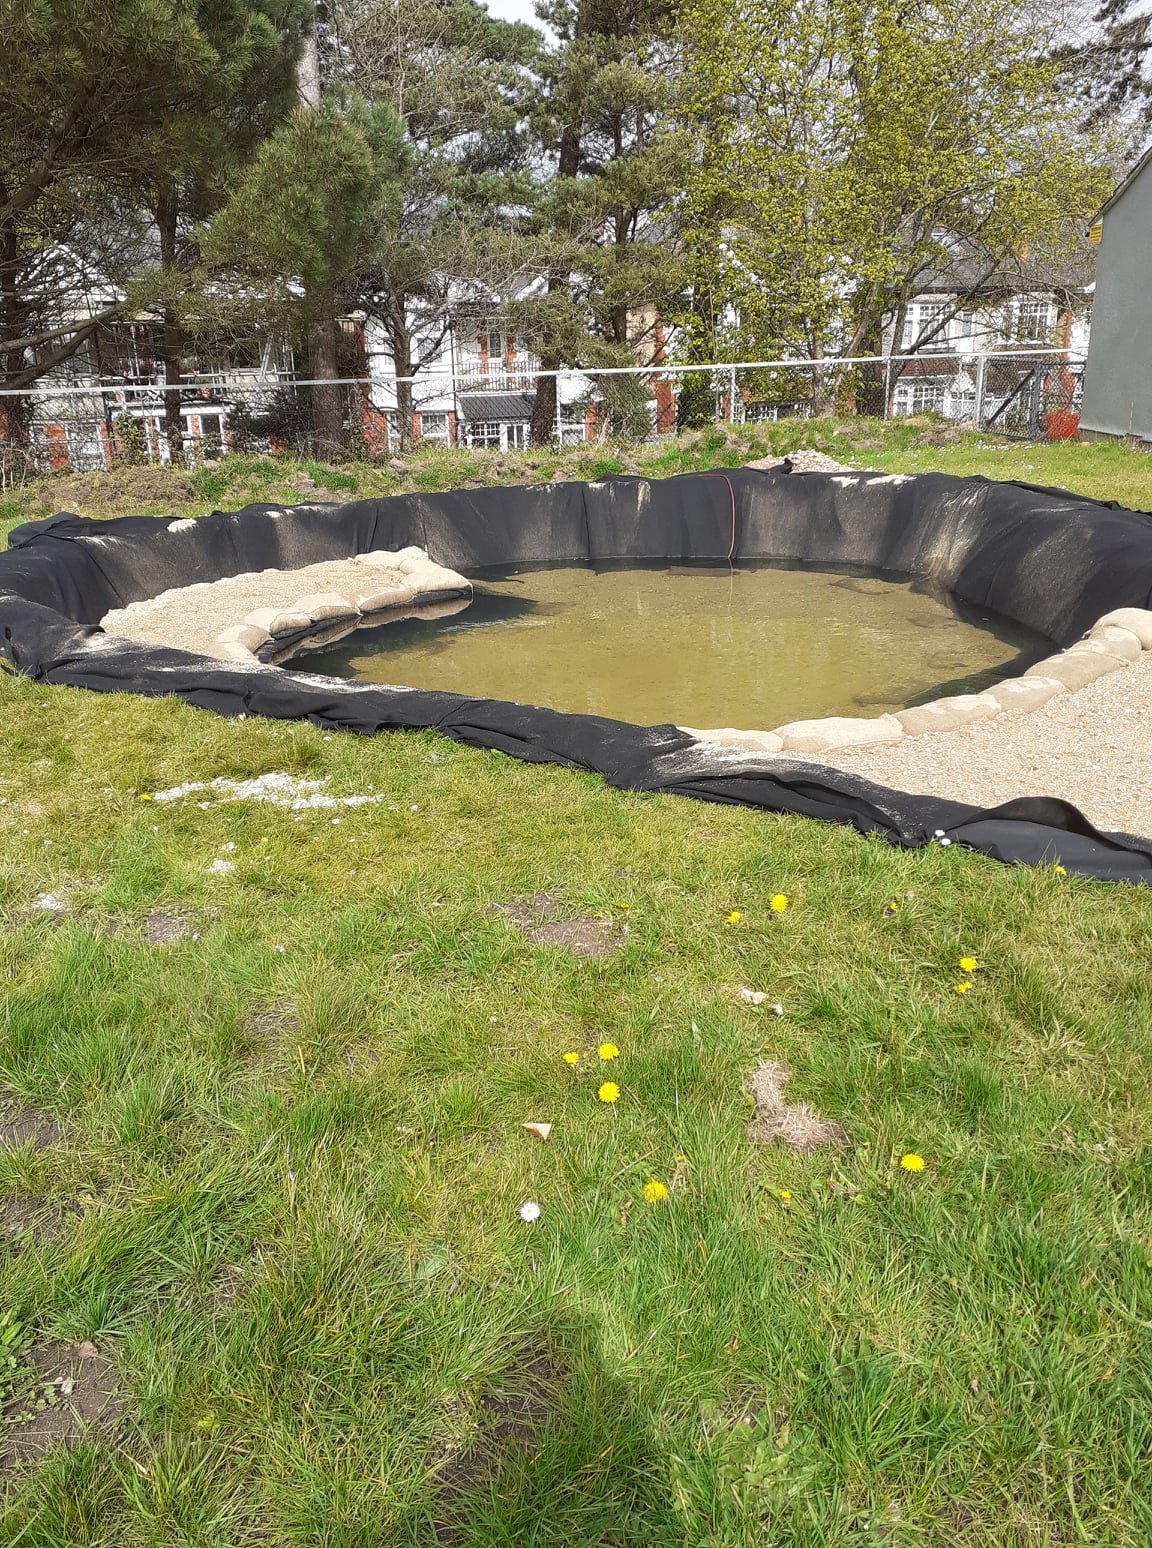 New pond being built at Winton Rec